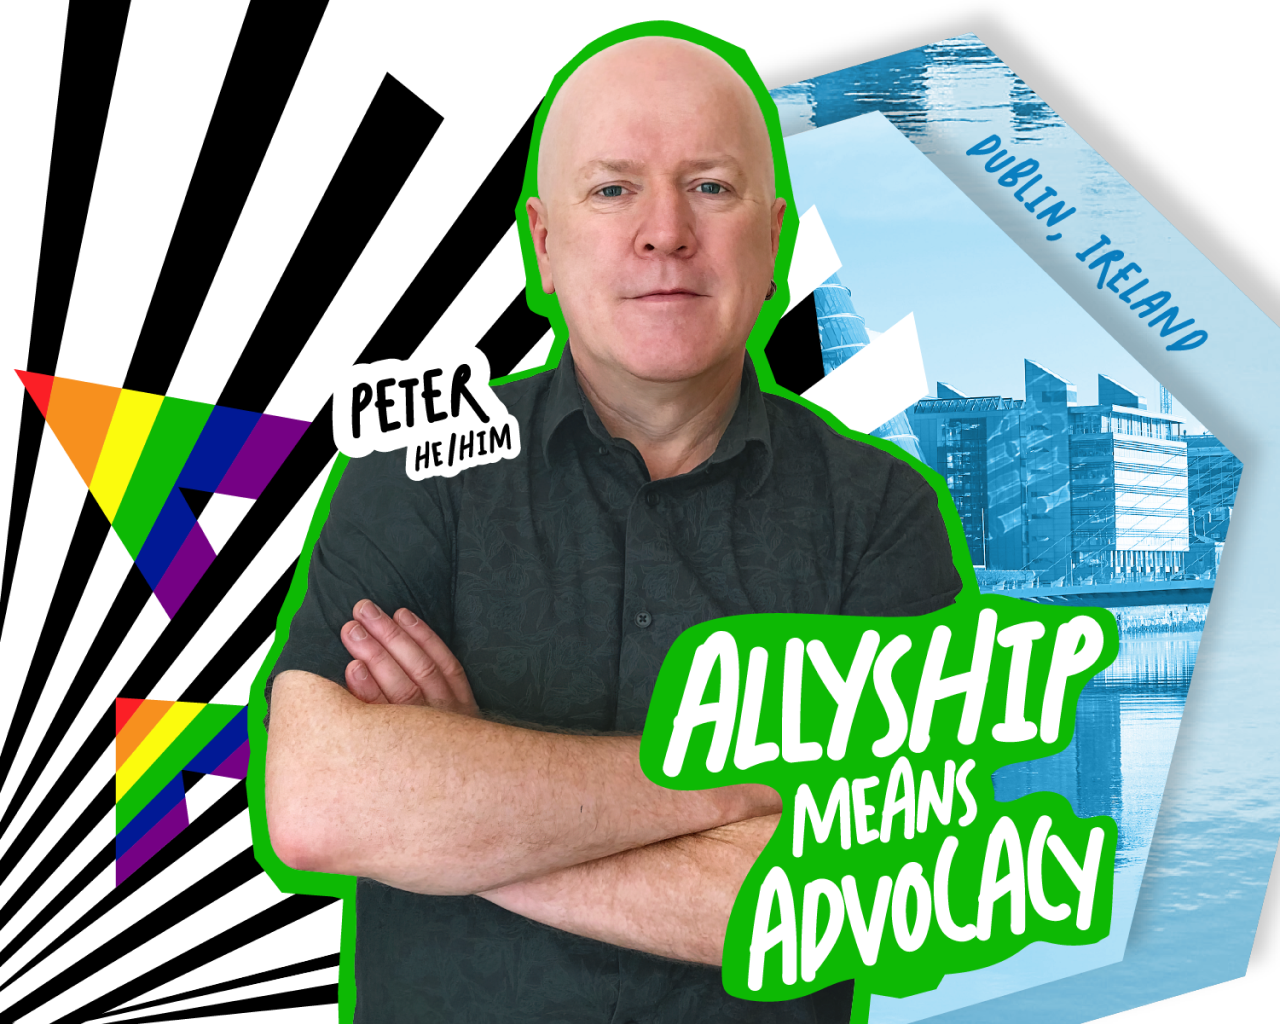 Peter he/him from Dublin, Ireland with quote allyship means advocacy